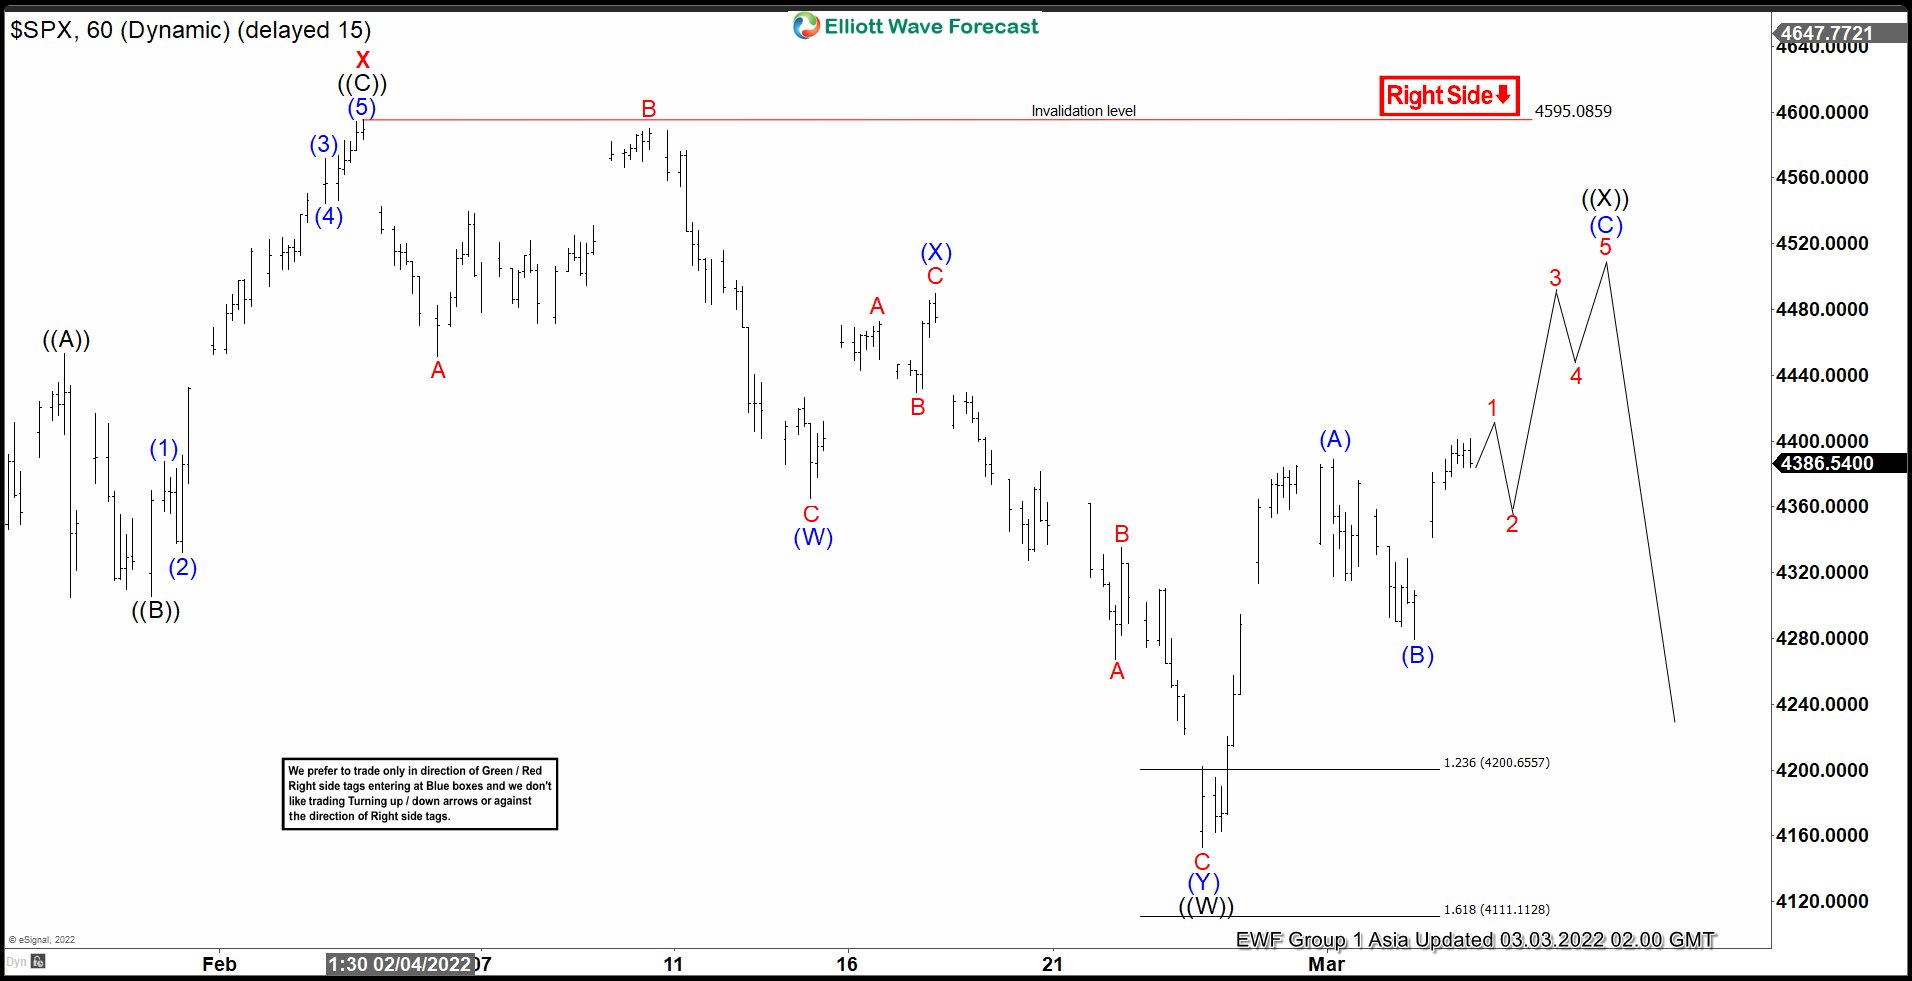 Elliott Wave View: S&P 500 (SPX) Rally Expected To Fail